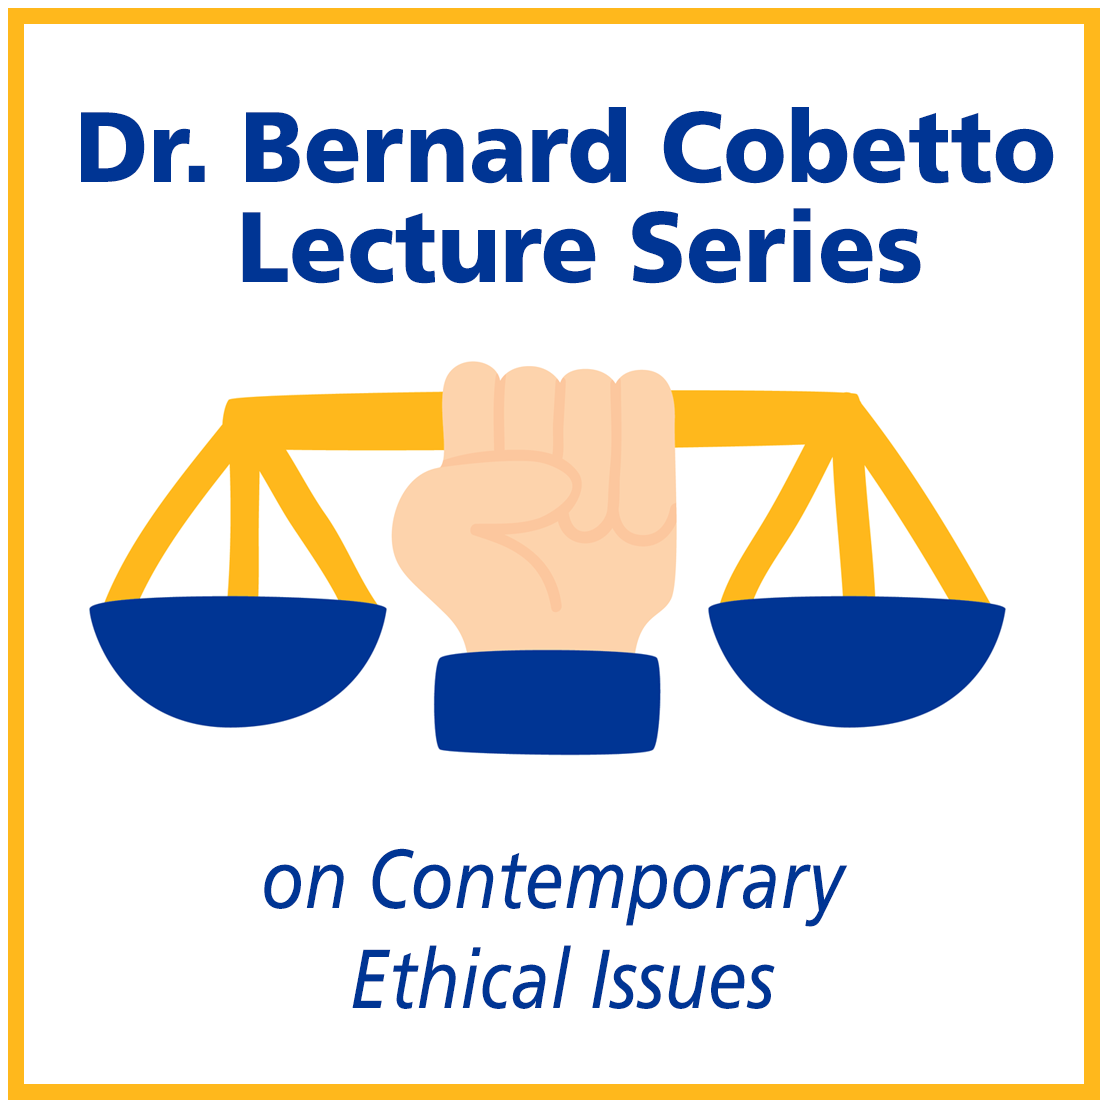 Dr. Bernard Cobetto Lecture Series on Contemporary Ethical Issues